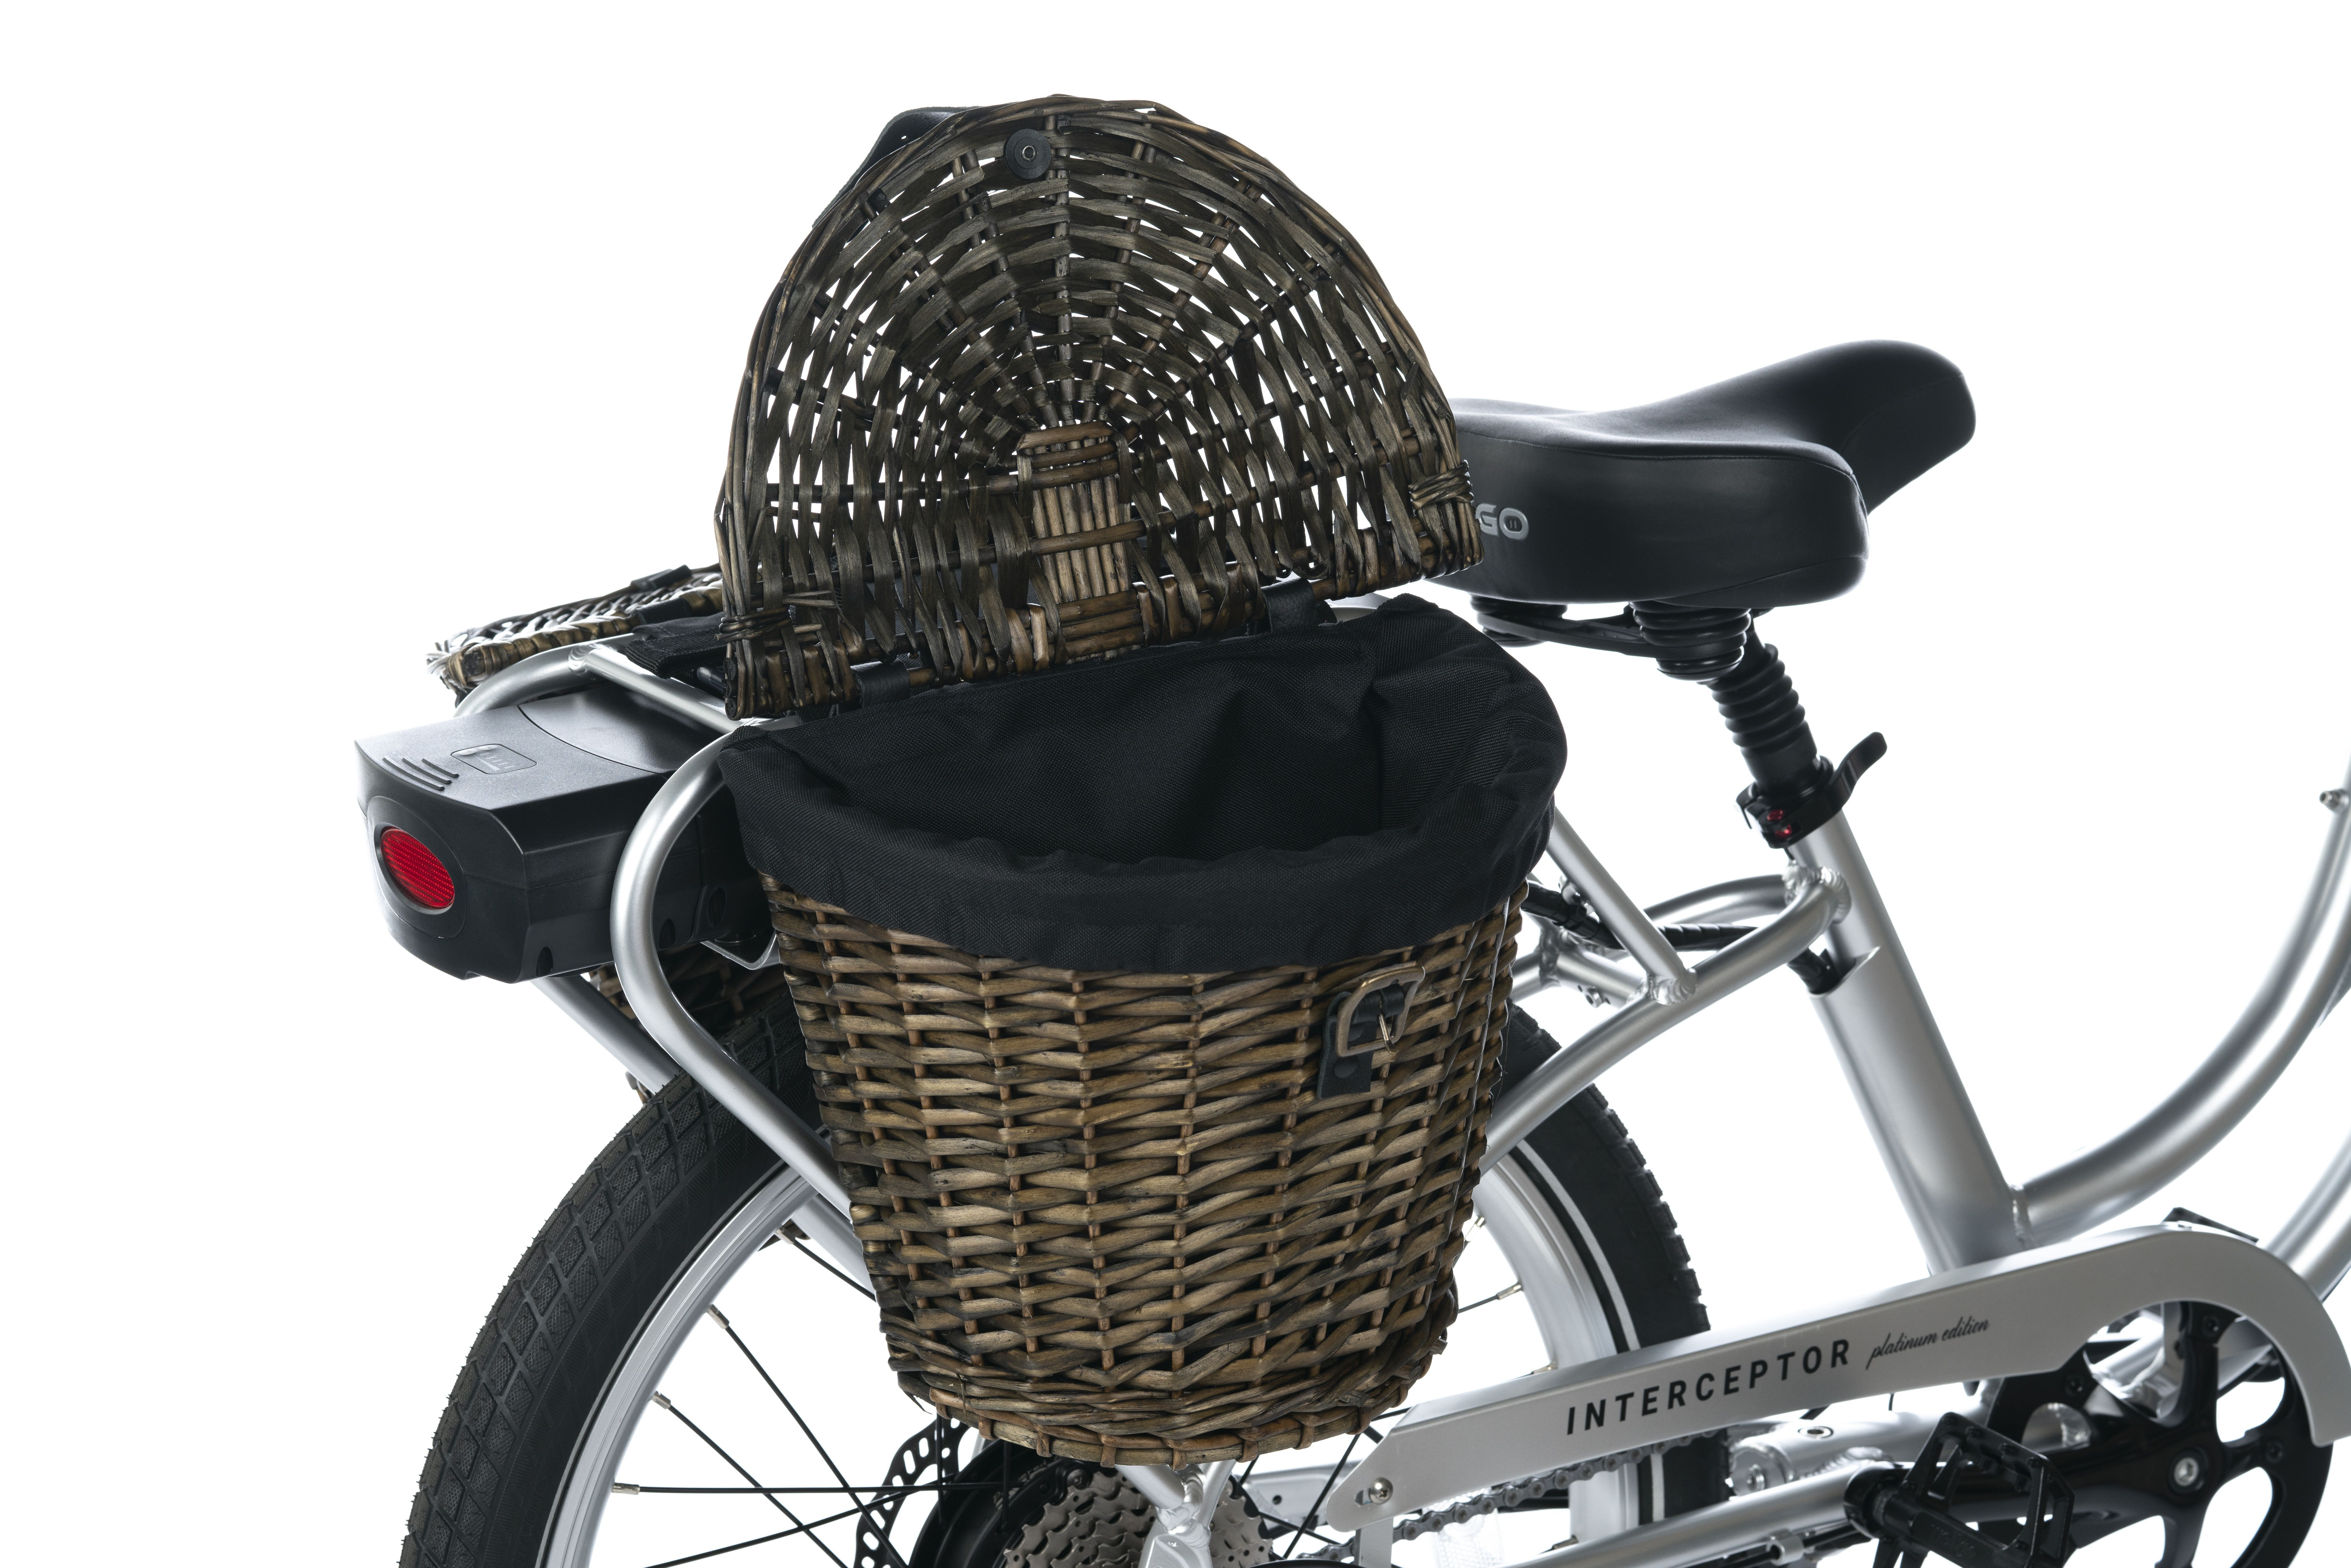 wicker bicycle